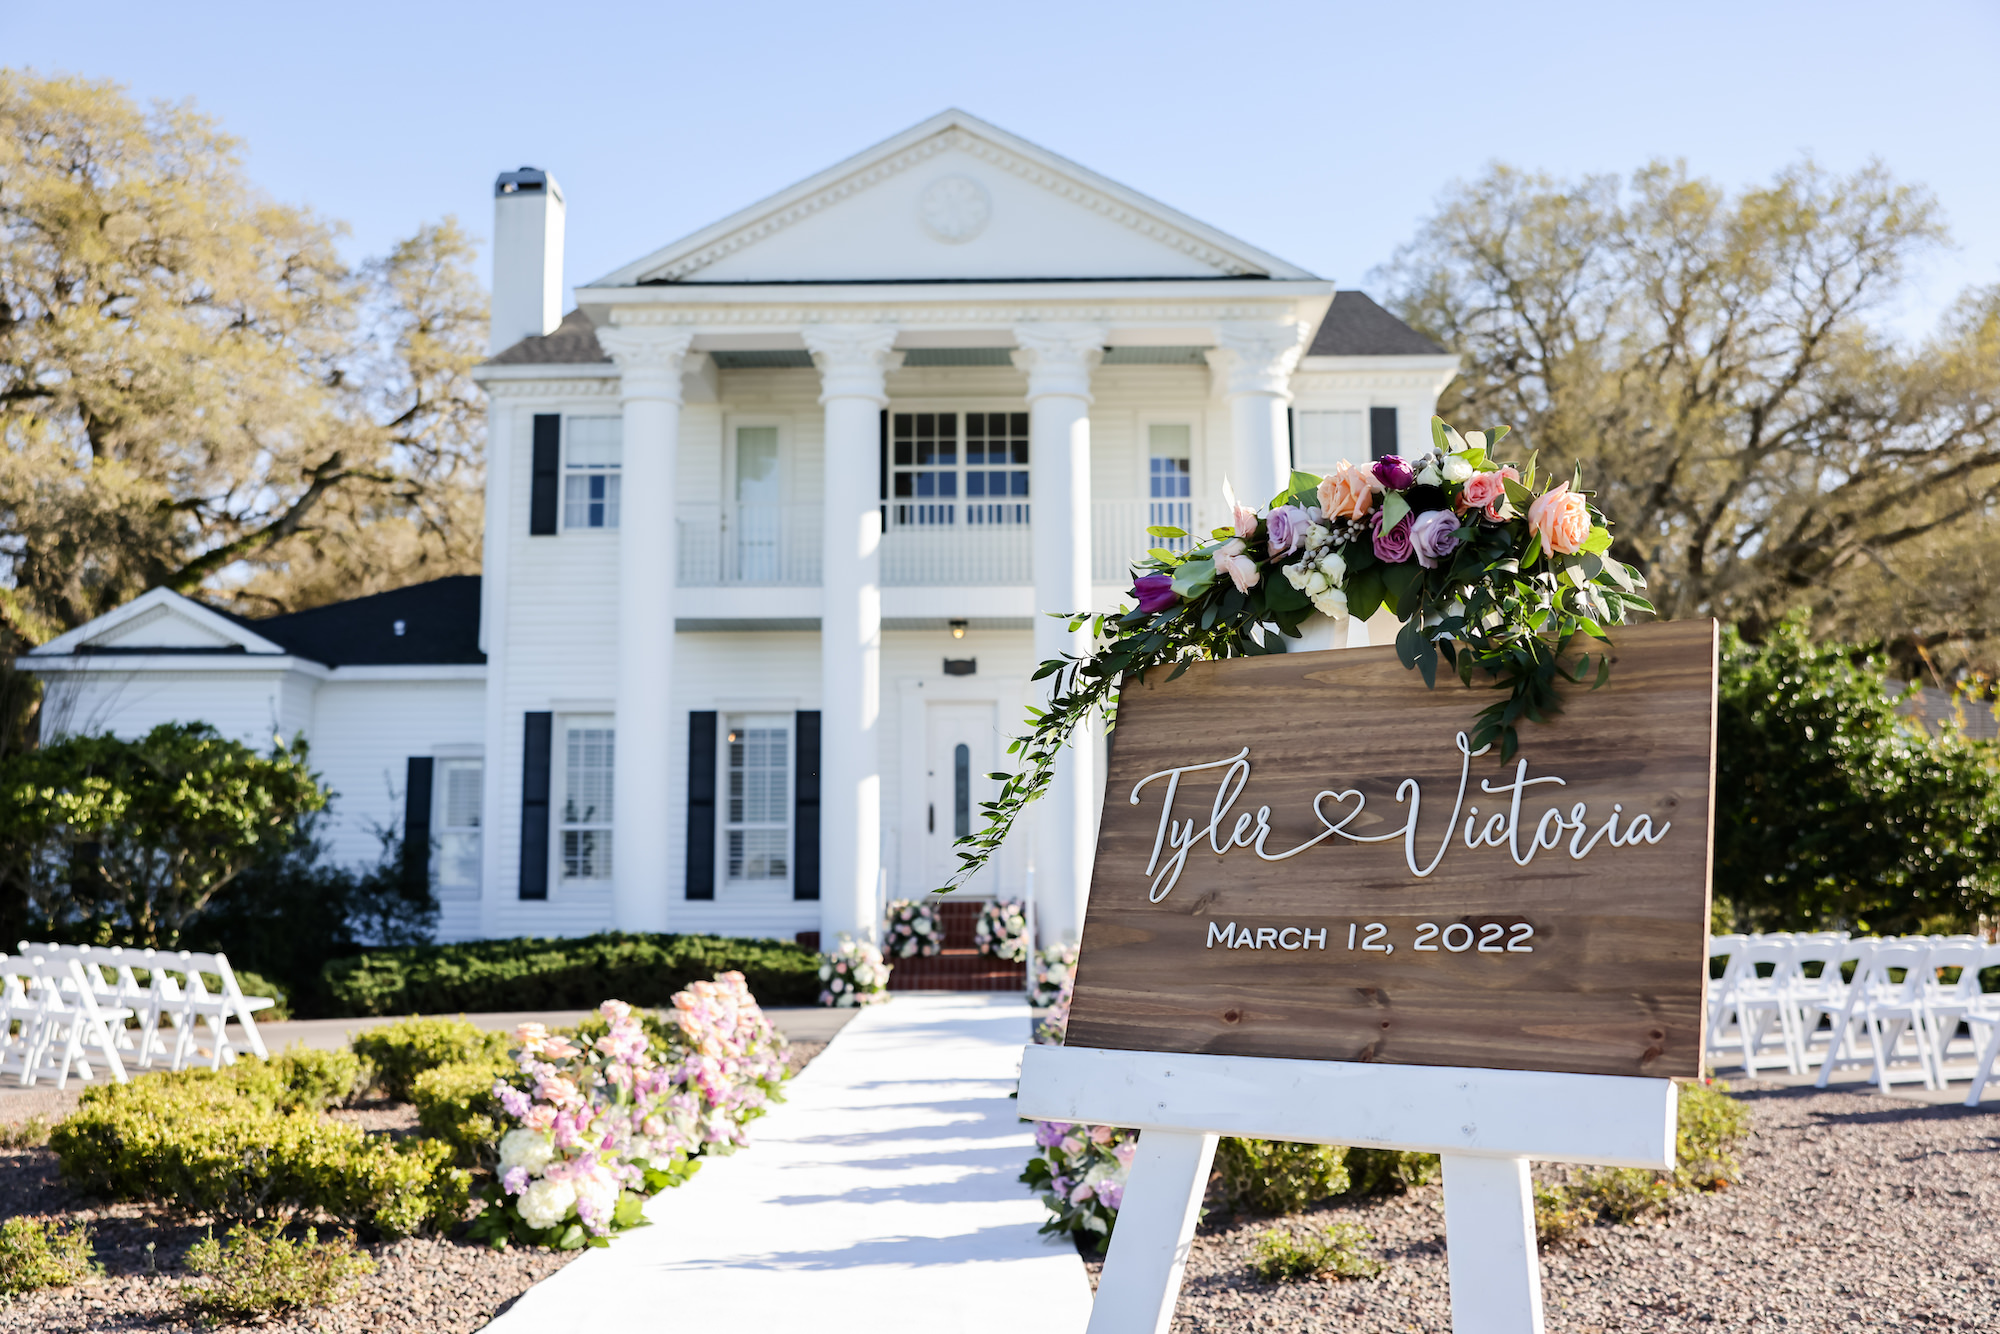 Rustic Wooden Wedding Sign Inspiration | Southern Venue Private Wedding Estate Ceremony Inspiration | Brooksville Wedding Venue Legacy Lane Weddings | Garden Folding Chairs